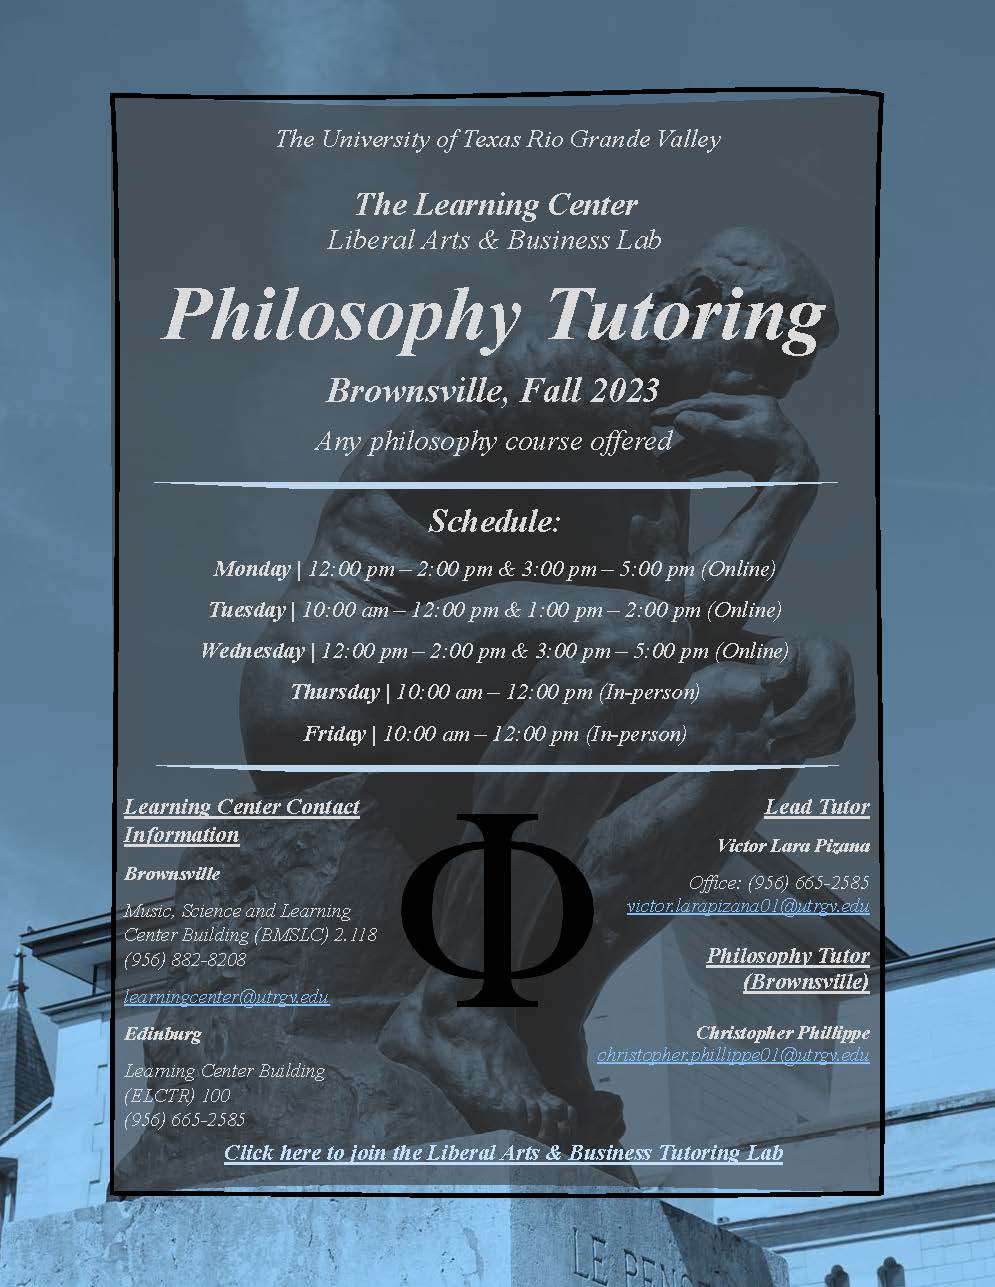 Philosophy tutoring is available in Brownsville this fall